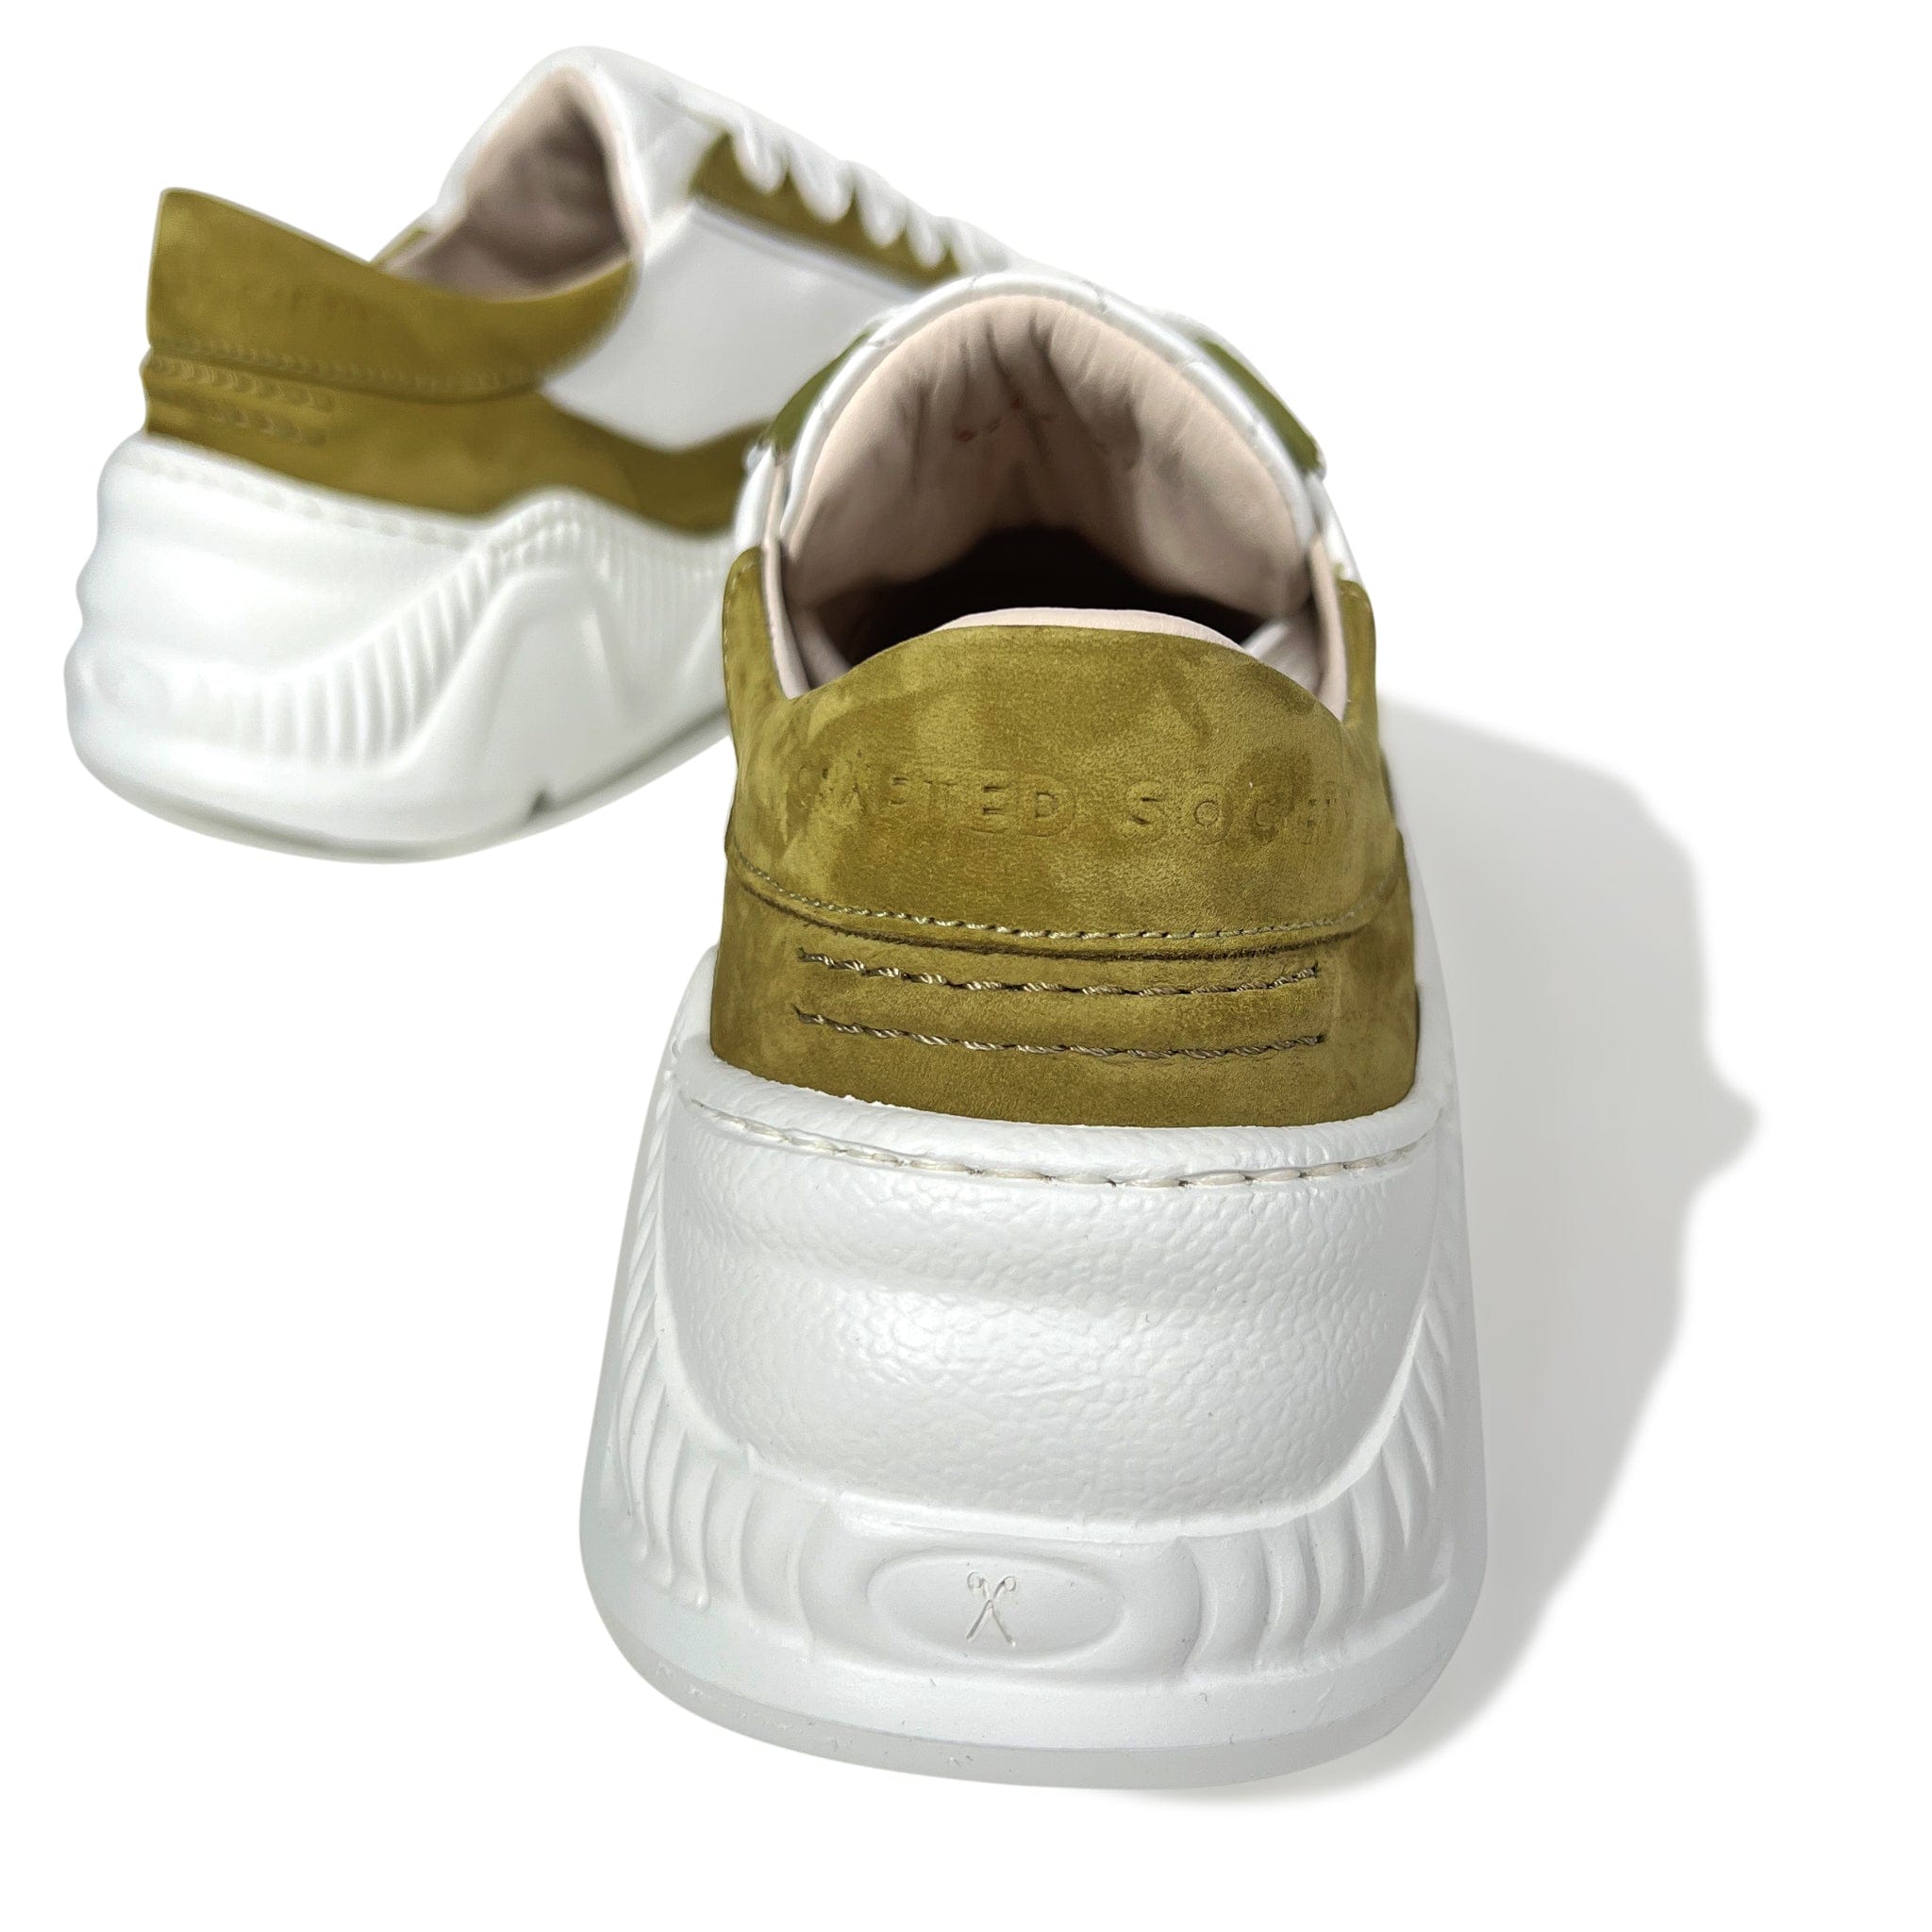 Nesto Low Top Italian Leather Sneaker | Light Olive and White | Made in Italy